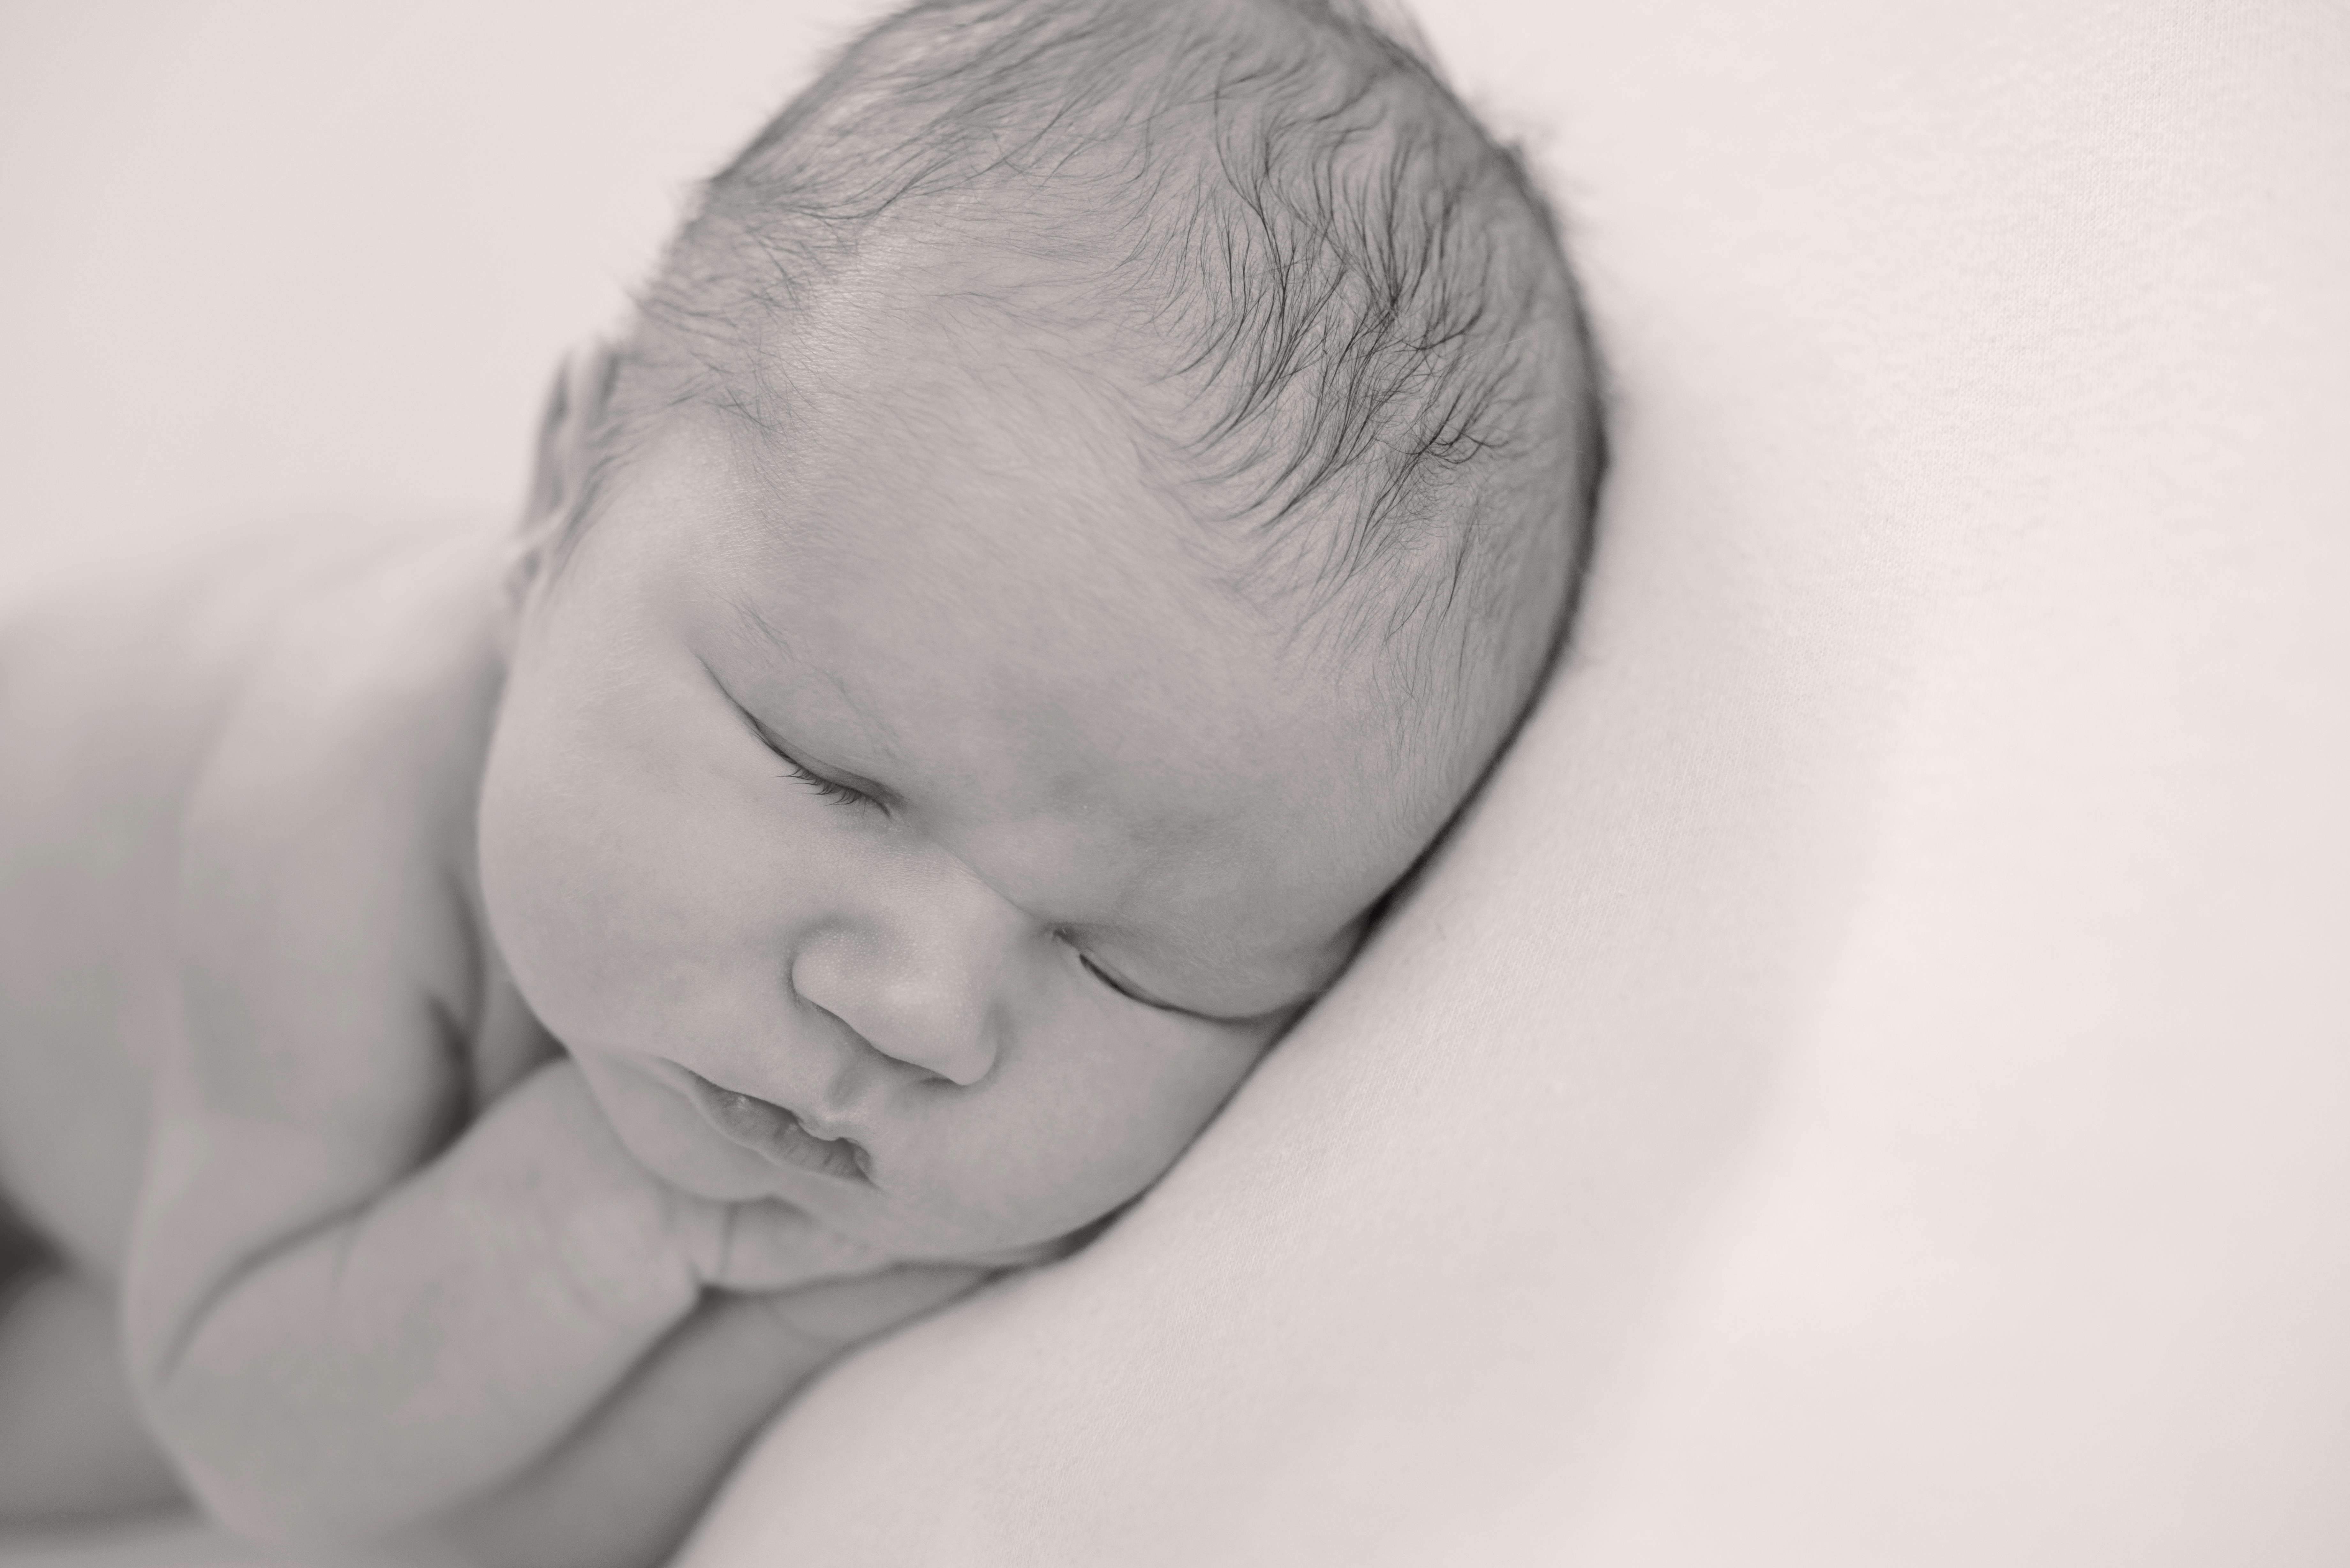 Newborn Photos and a Confession